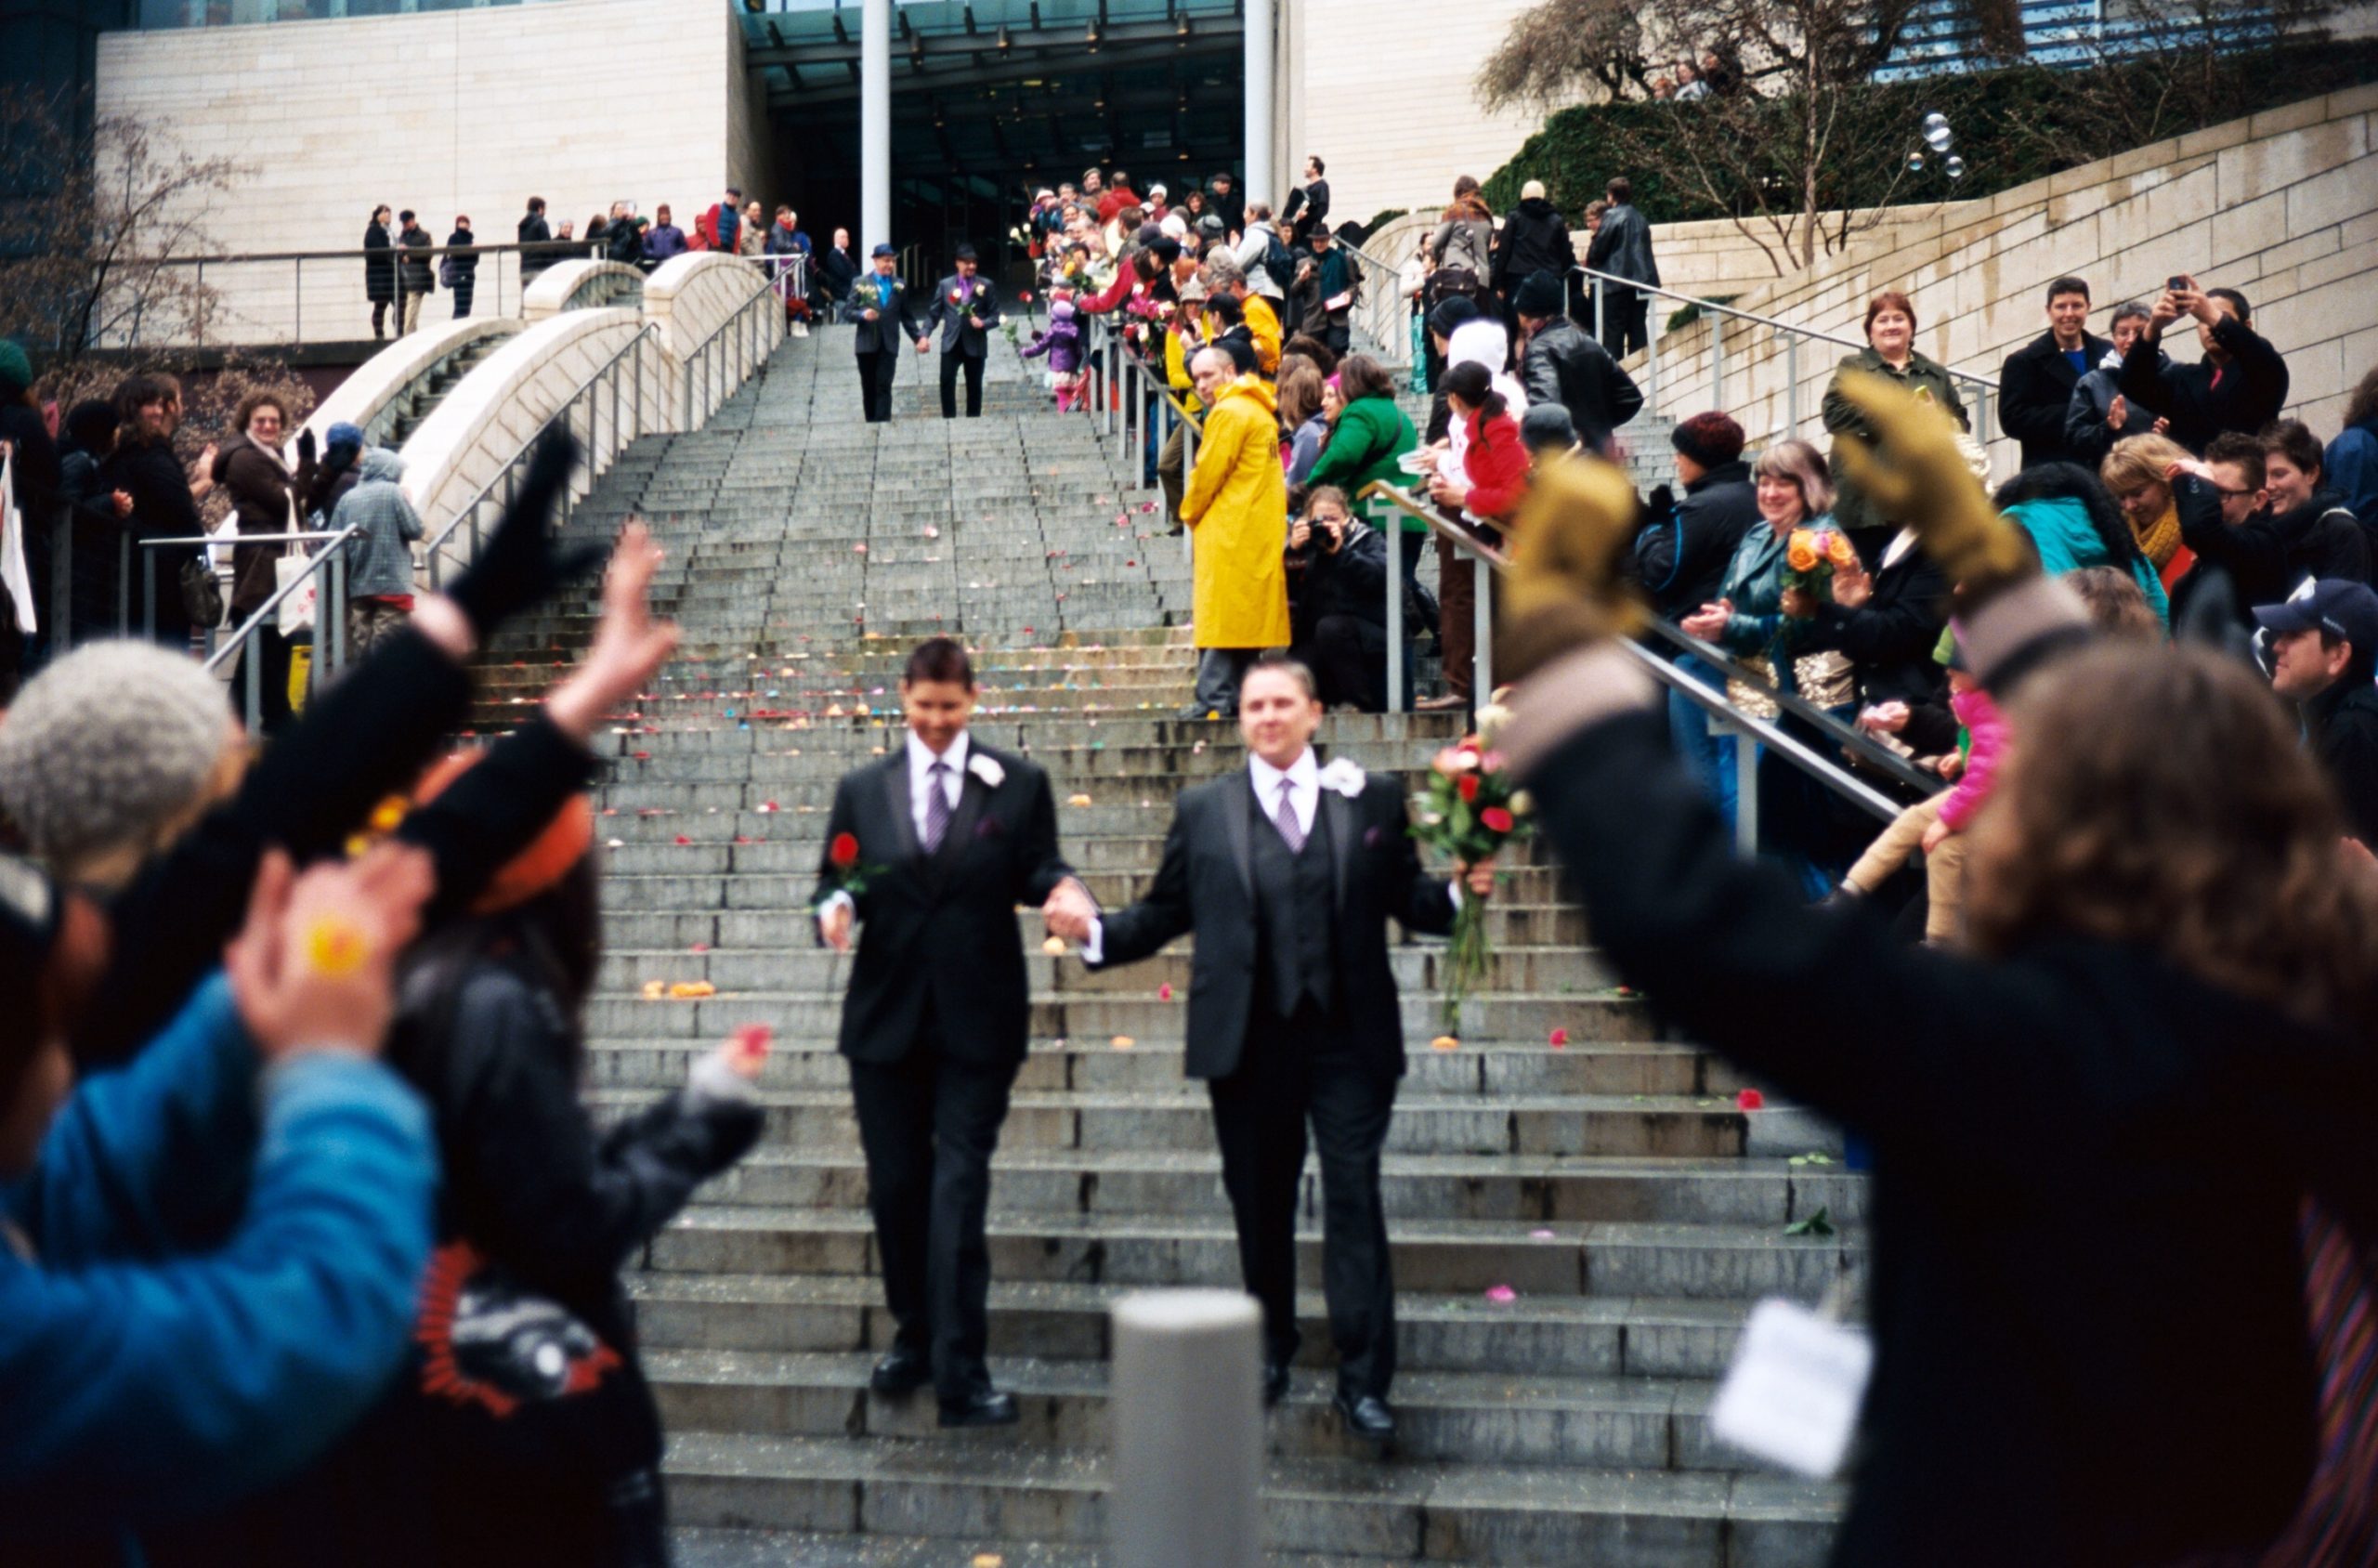 leaving_seattle_city_hall_on_first_day_of_gay_marriage_in_washington_2